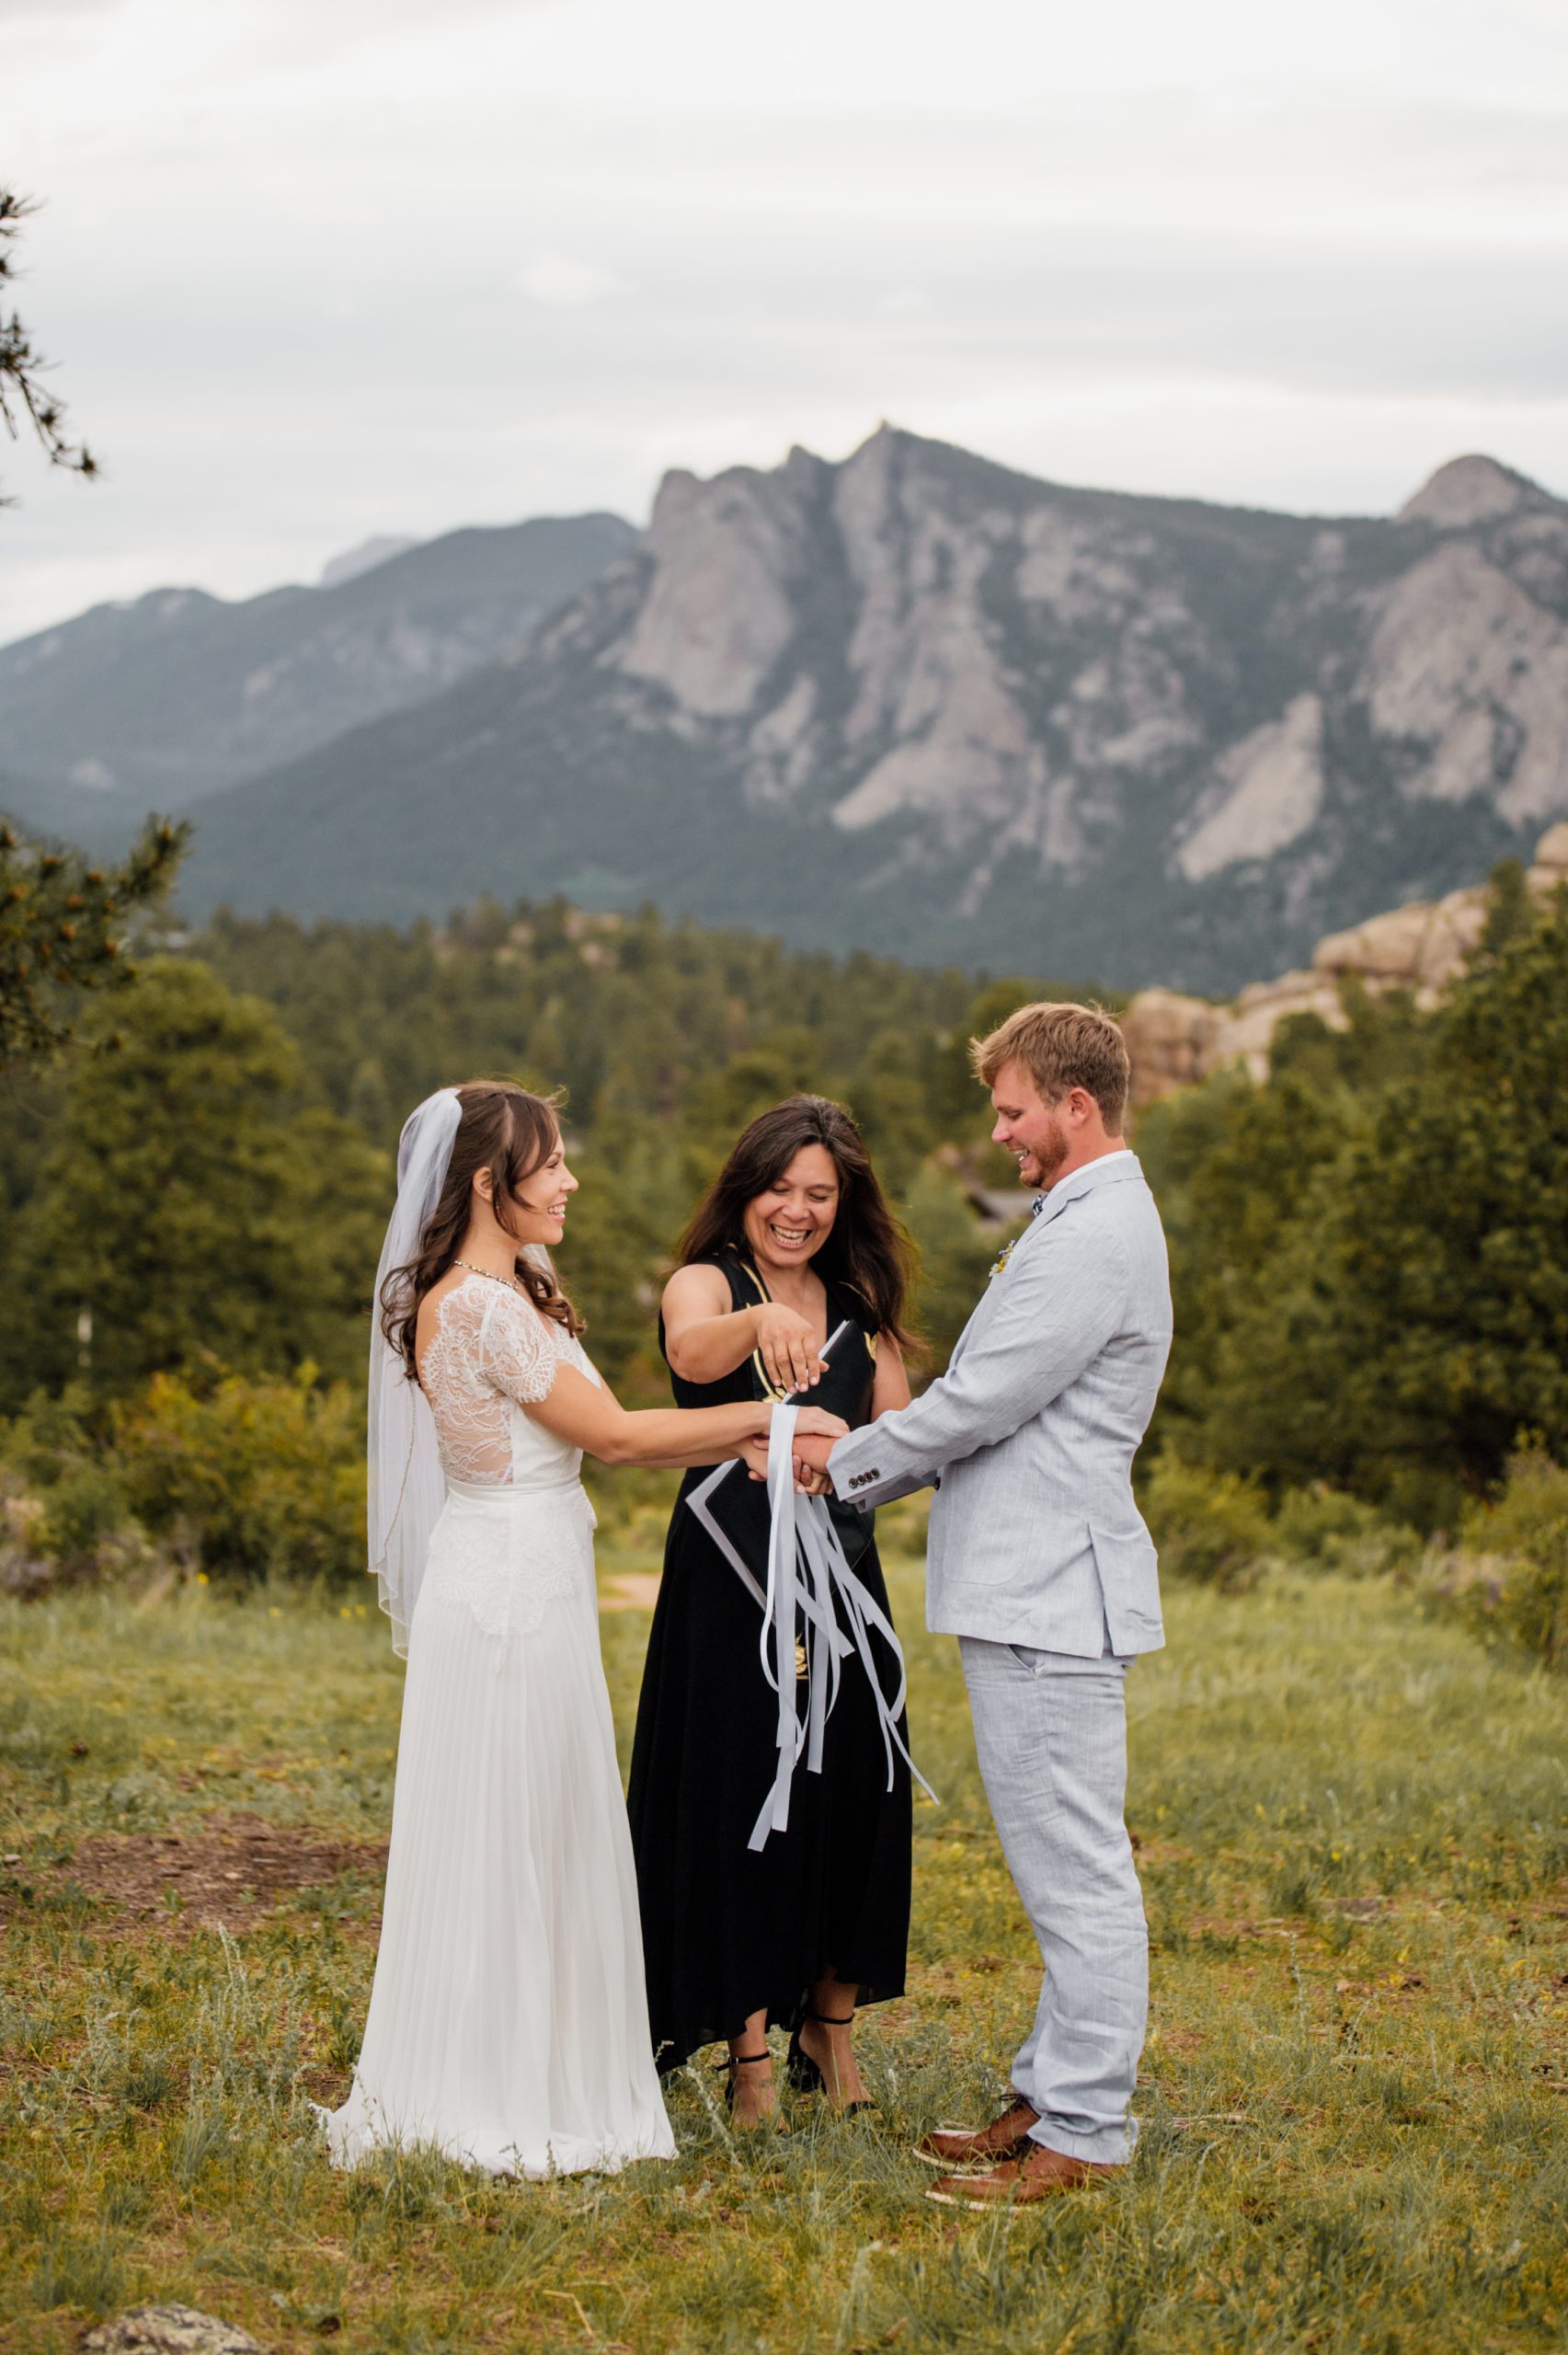 The bride and groom laughing during their hand fasting ceremony during their elopement at  Knoll Willows in Estes Park.